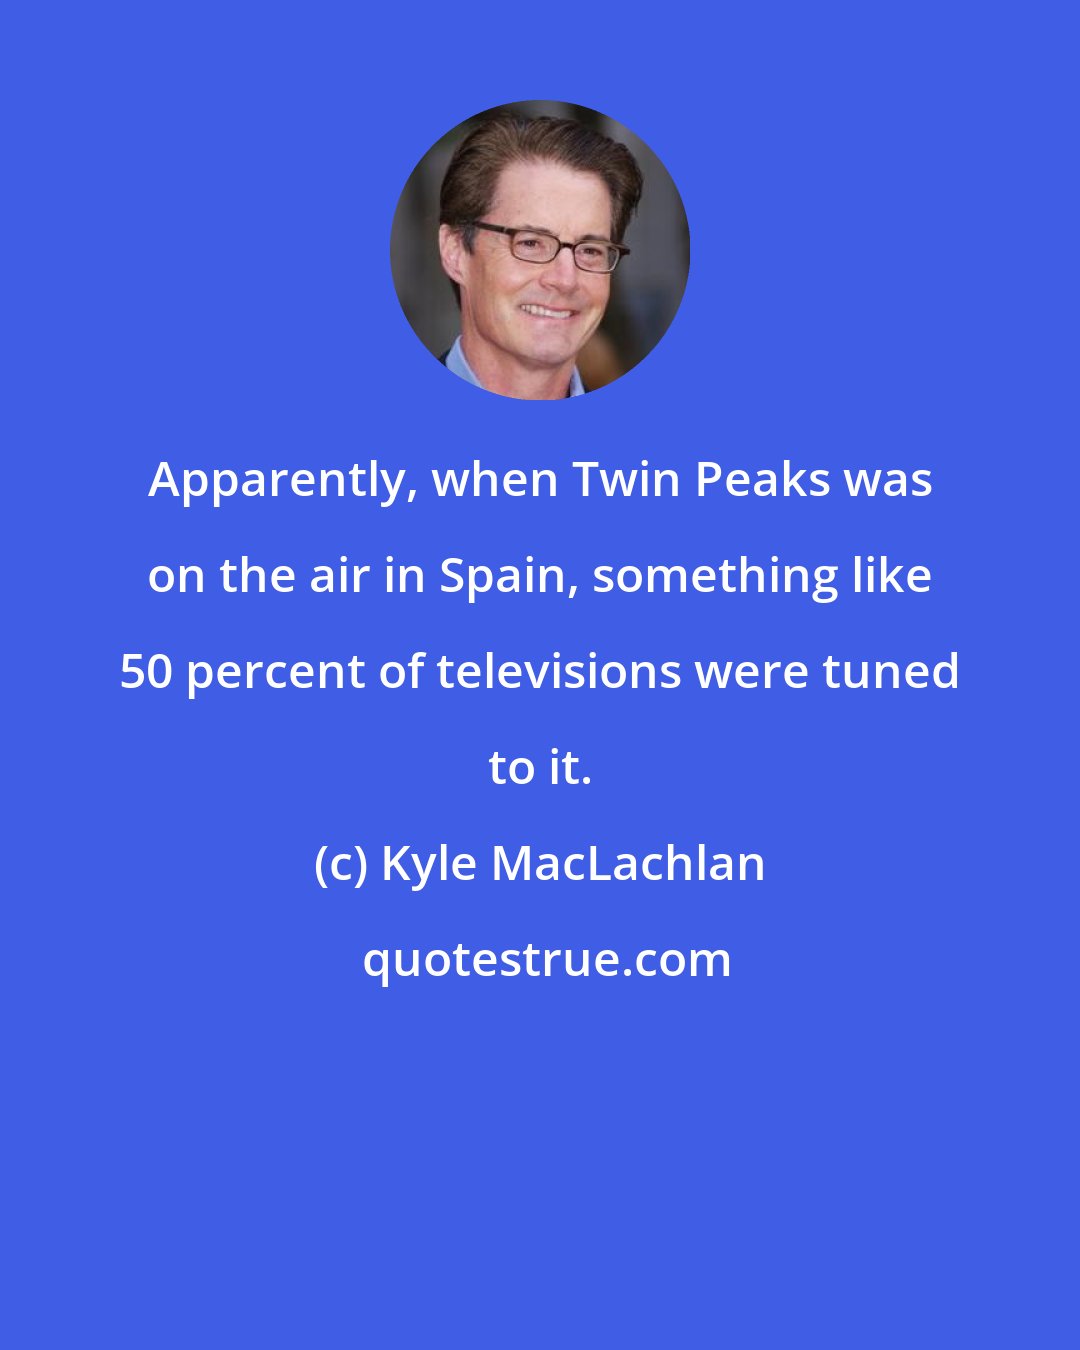 Kyle MacLachlan: Apparently, when Twin Peaks was on the air in Spain, something like 50 percent of televisions were tuned to it.